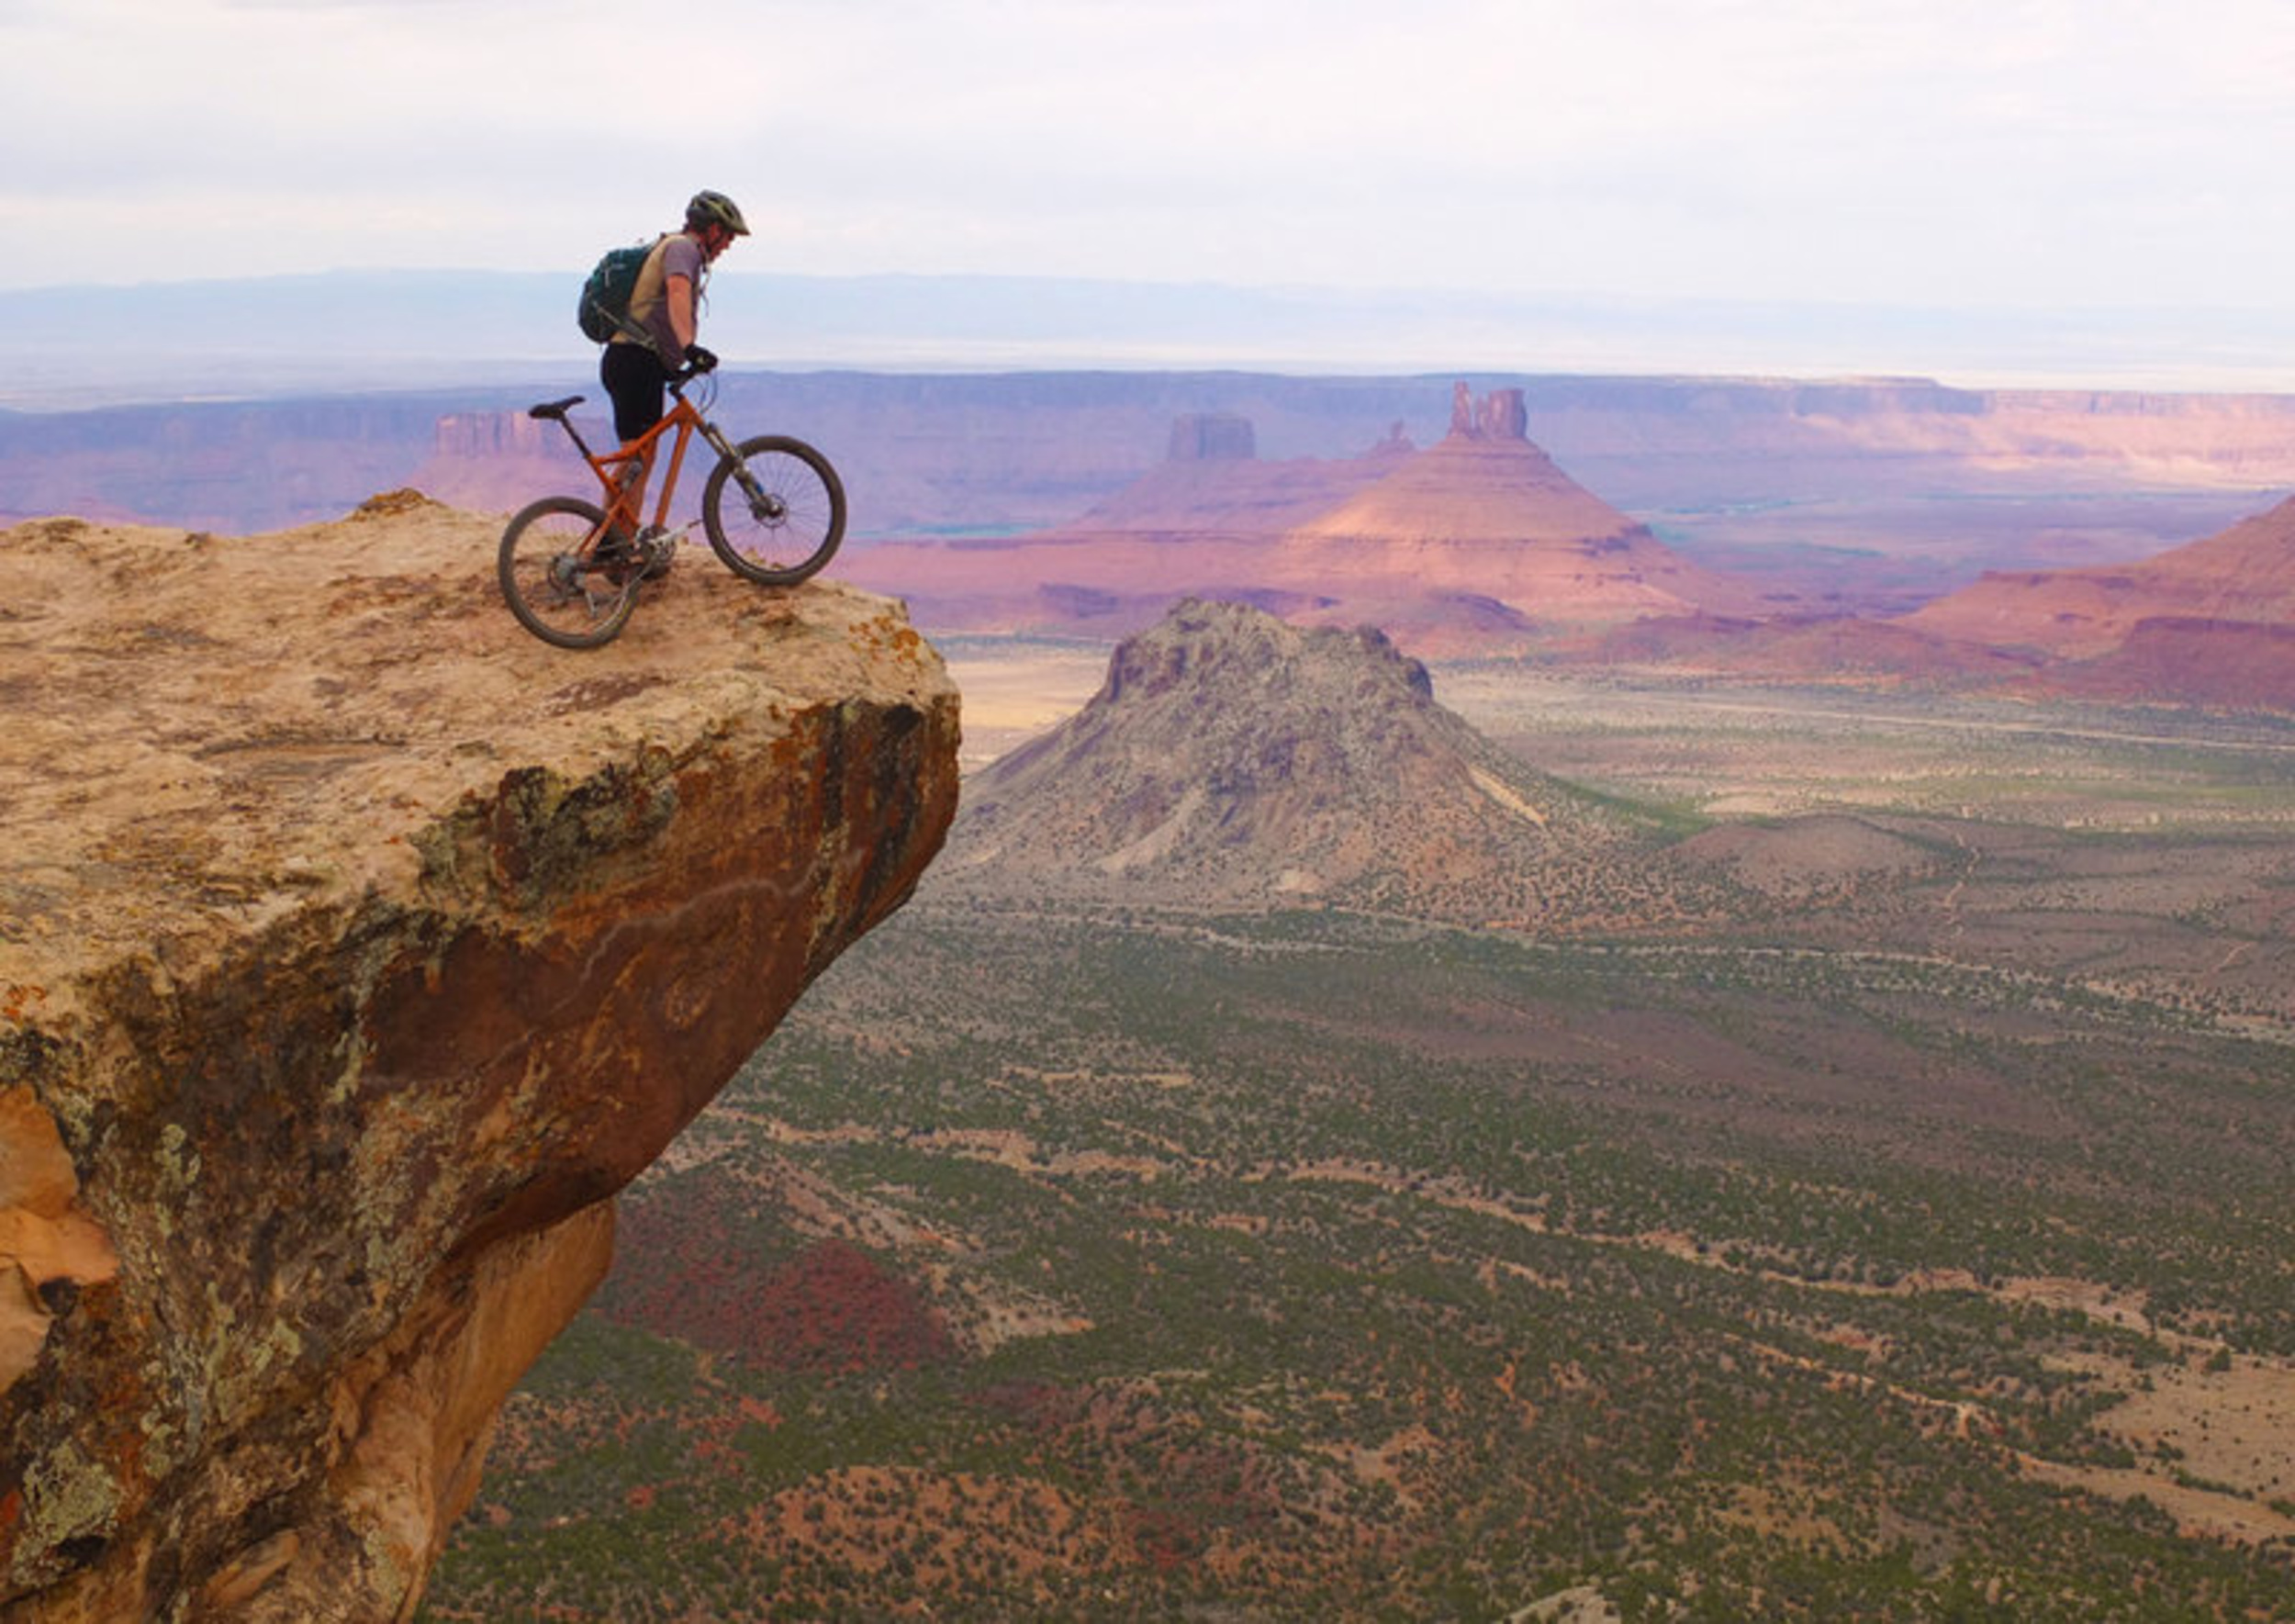 <p>You gotta have a big stomach and bigger guts to take down the Whole Enchilada. A bumpy bike trail that has more ledges than the Grand Canyon, this is hands down the gnarliest trail in Utah. Only go if you have experience with black-level trails. </p><p><a href='https://www.msn.com/en-us/community/channel/vid-cj9pqbr0vn9in2b6ddcd8sfgpfq6x6utp44fssrv6mc2gtybw0us'>Did you enjoy this slideshow? Follow us on MSN to see more of our exclusive lifestyle content.</a></p>